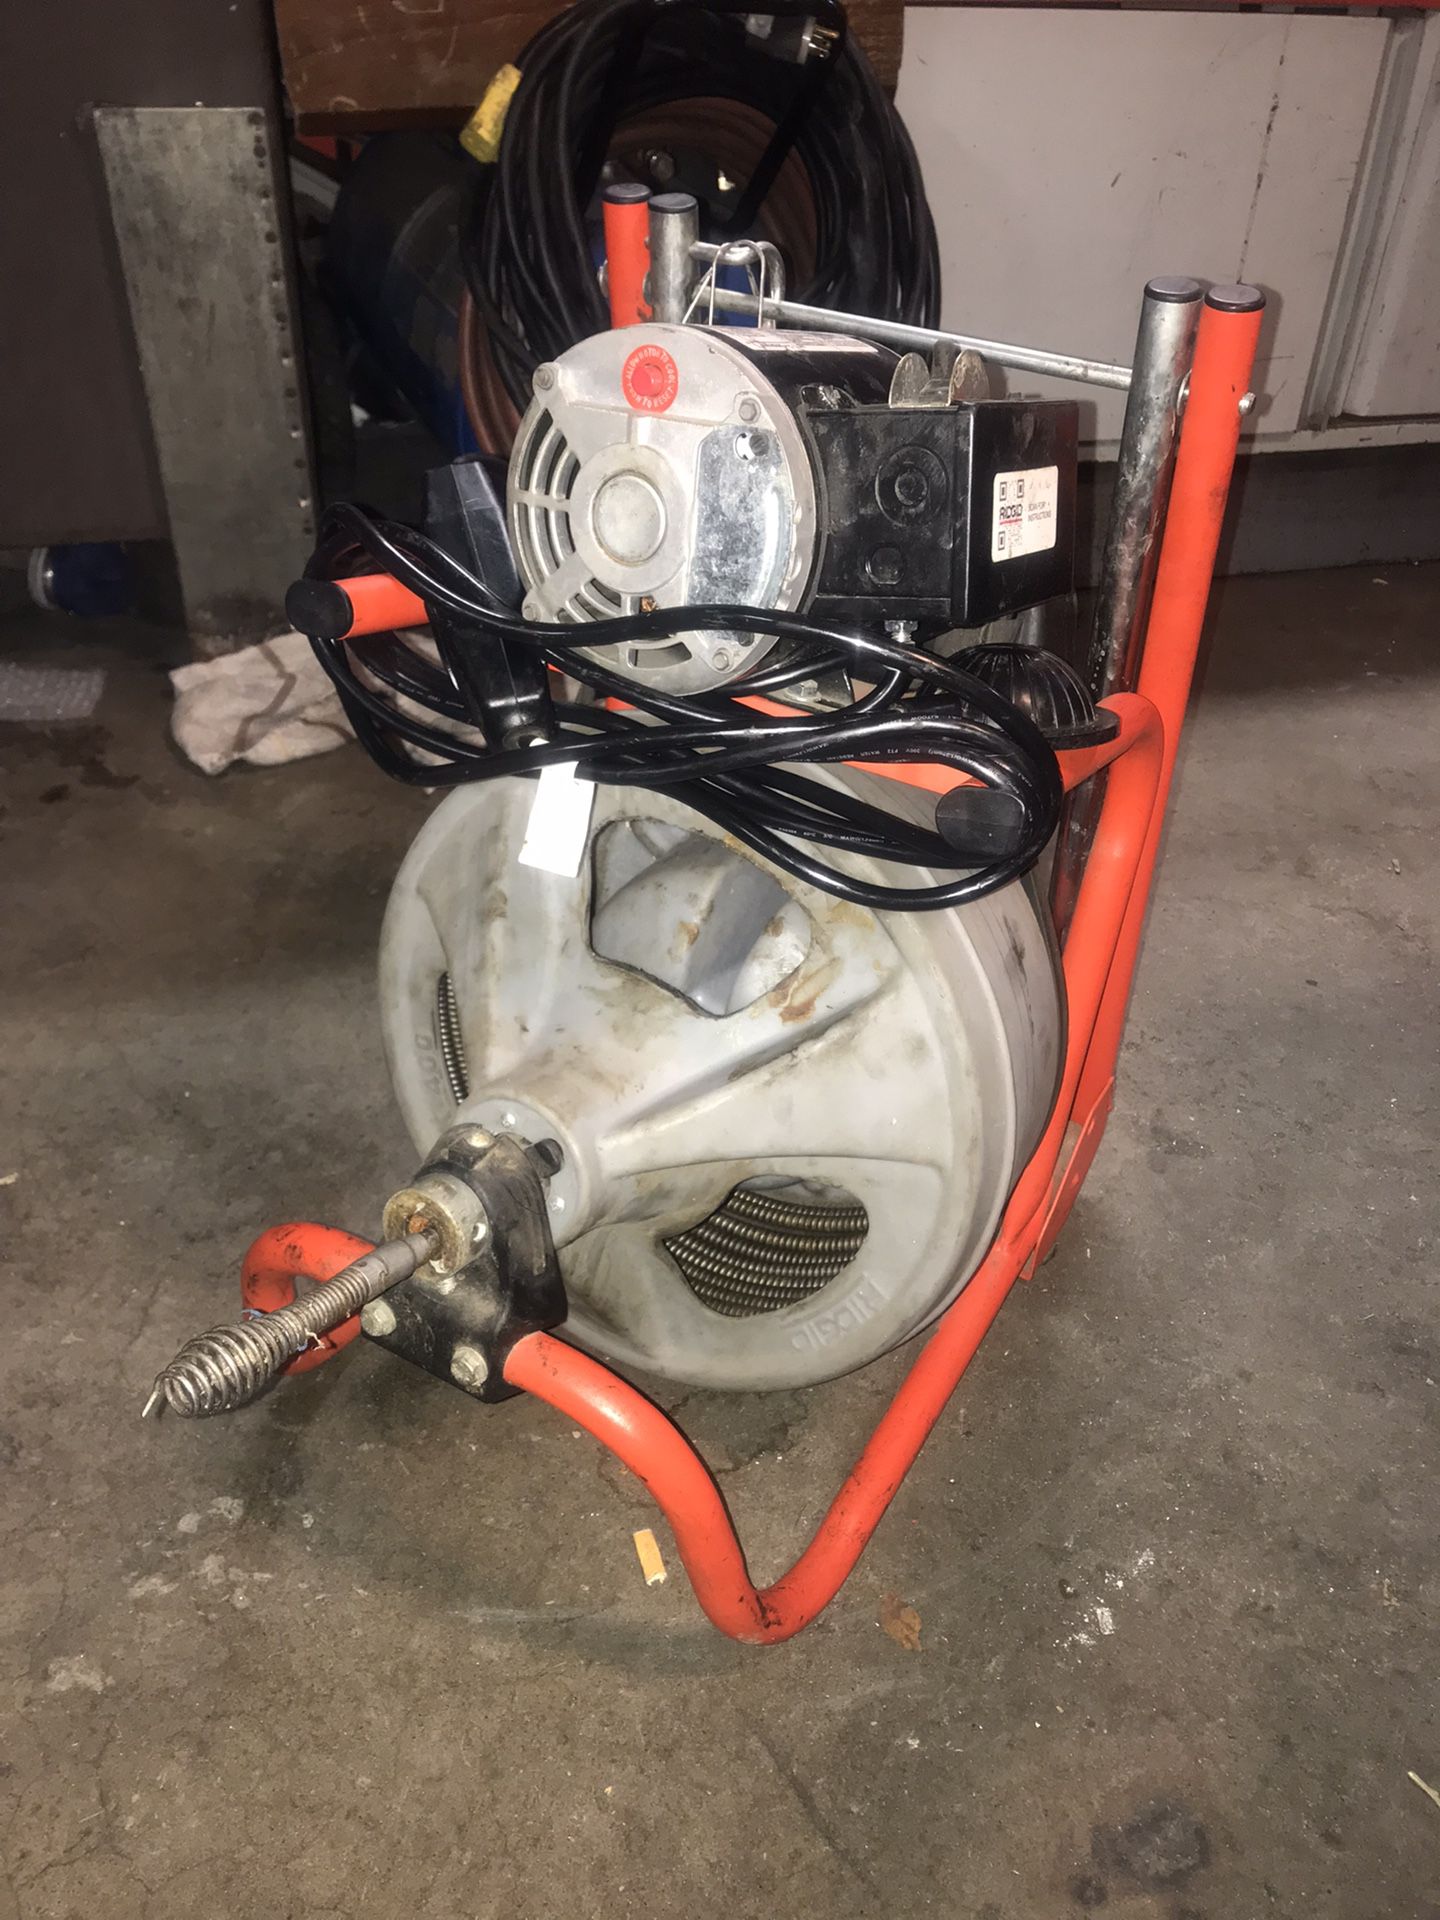 RIDGID K-400 Drain Cleaning Snake Auger 120-Volt Drum Machine with C-32IW 3/8 in. x 75 ft. Cable